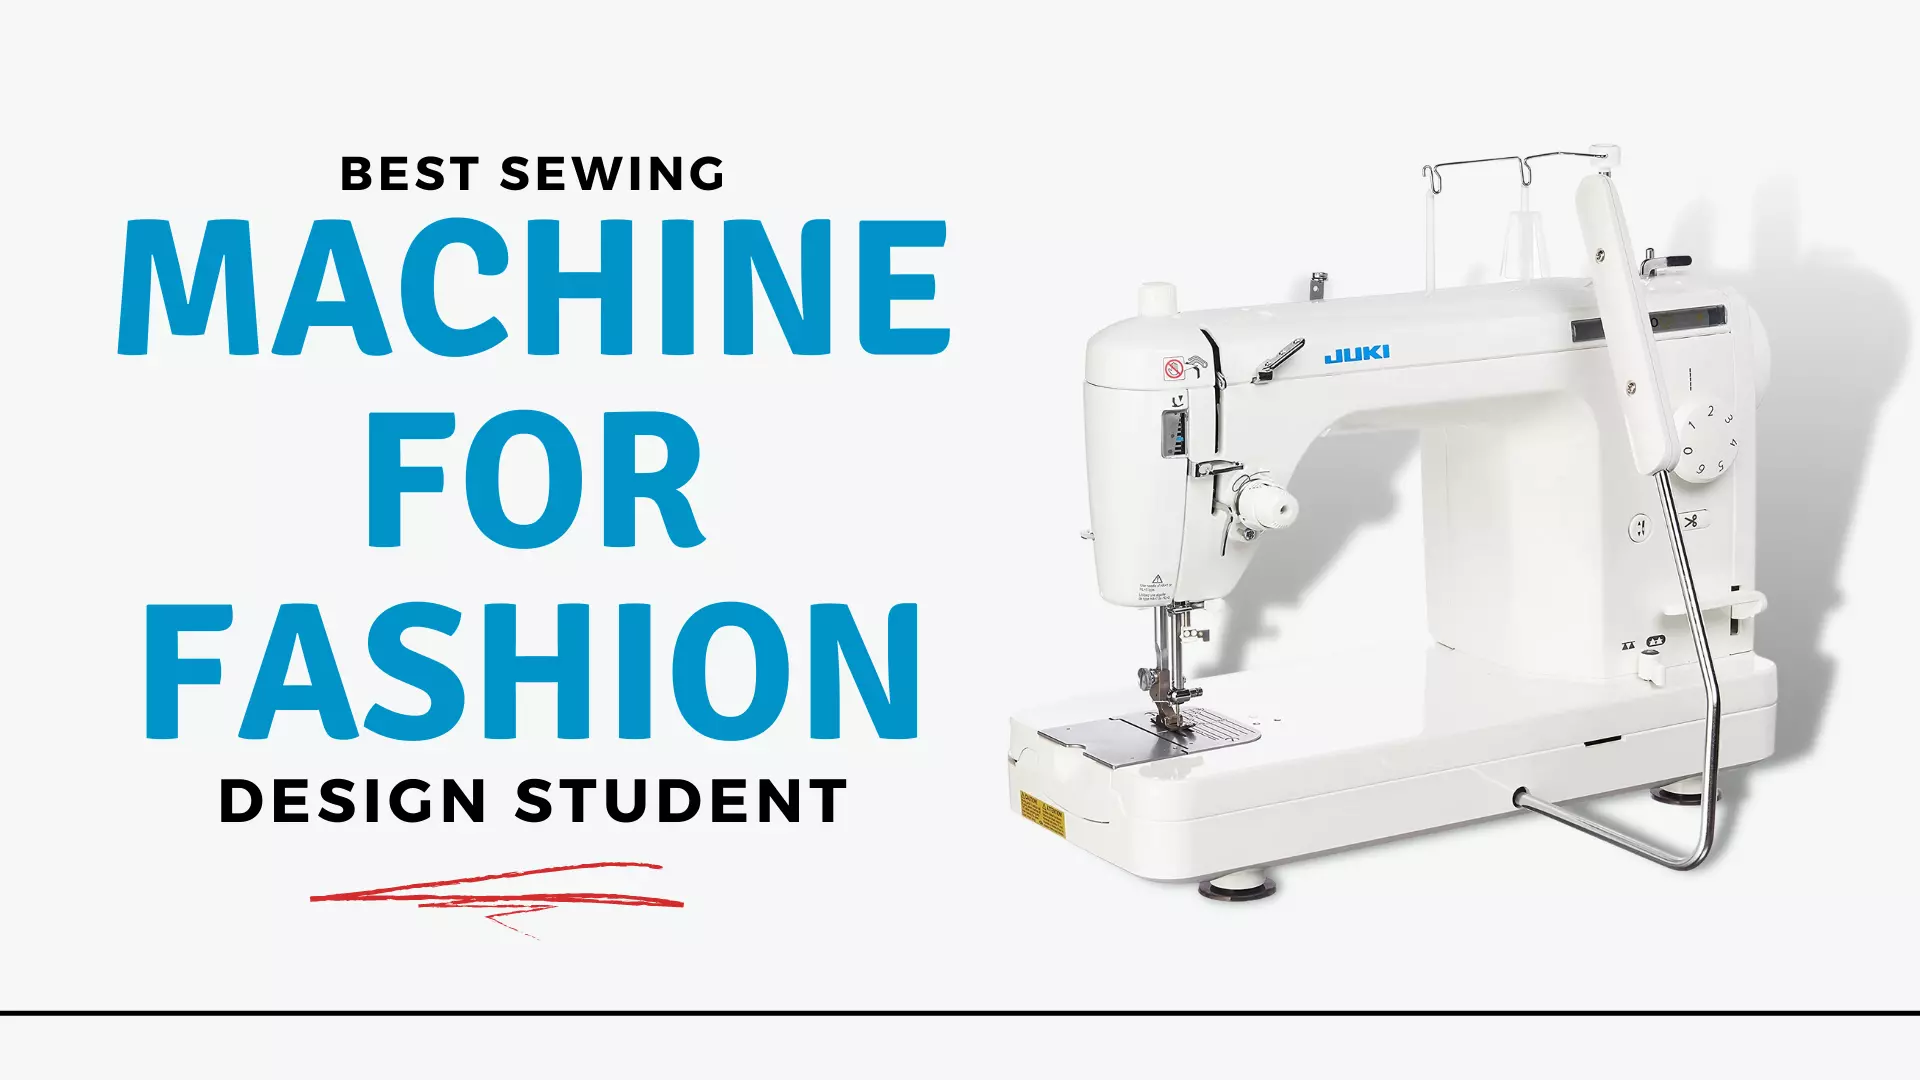 Best Sewing Machine for Fashion Design Student